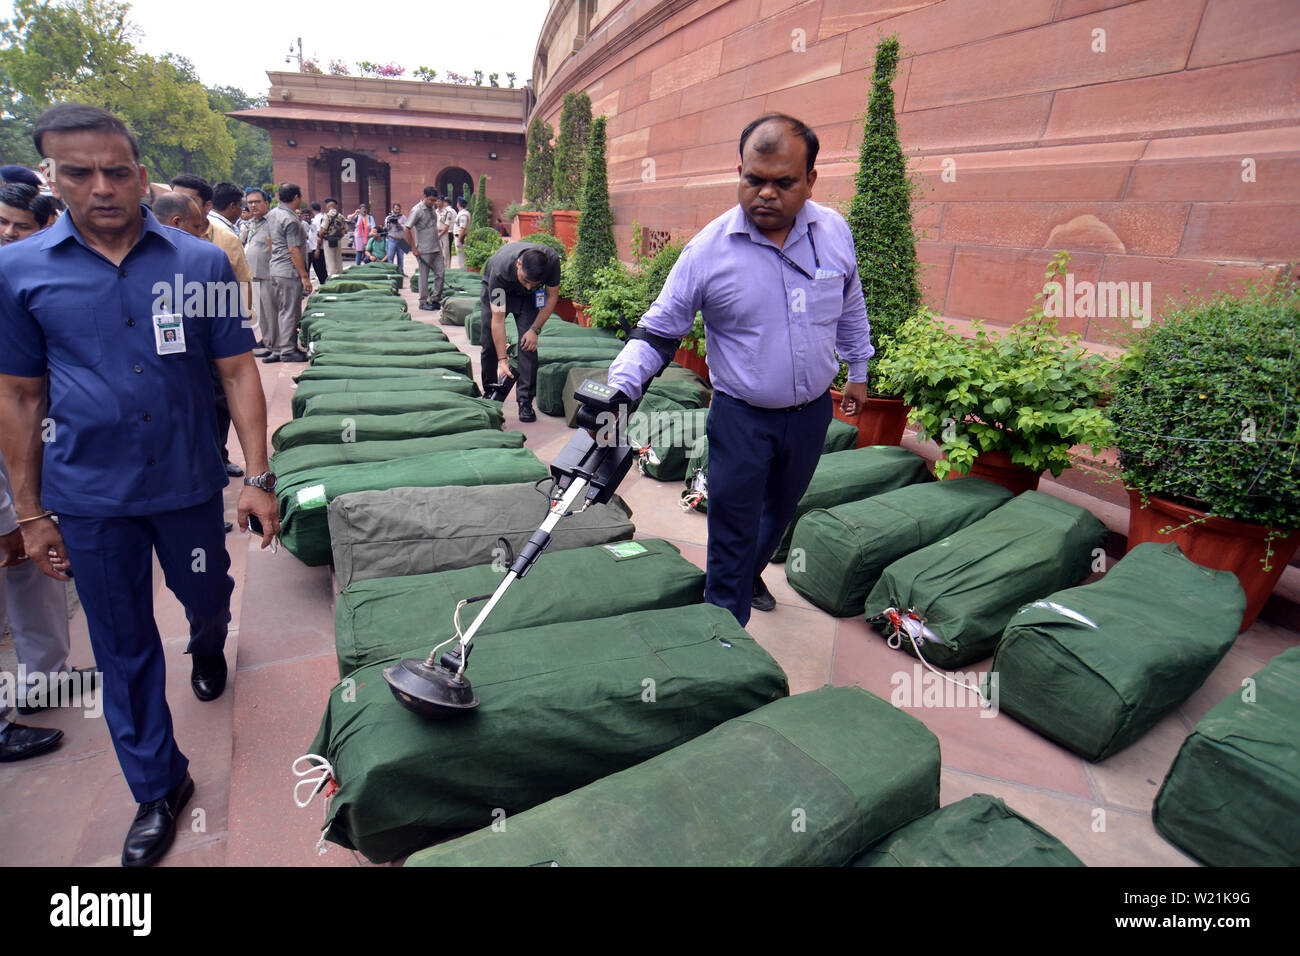 (190705) -- NEW DELHI, July 5, 2019 (Xinhua) -- Security personnel check the budget papers at the parliament house in New Delhi, India, on July 5, 2019. India's Finance Minister Nirmala Sitharaman presented the country's General Budget 2019-20 in parliament on Friday, officials said. (Xinhua/Partha Sarkar) Stock Photo